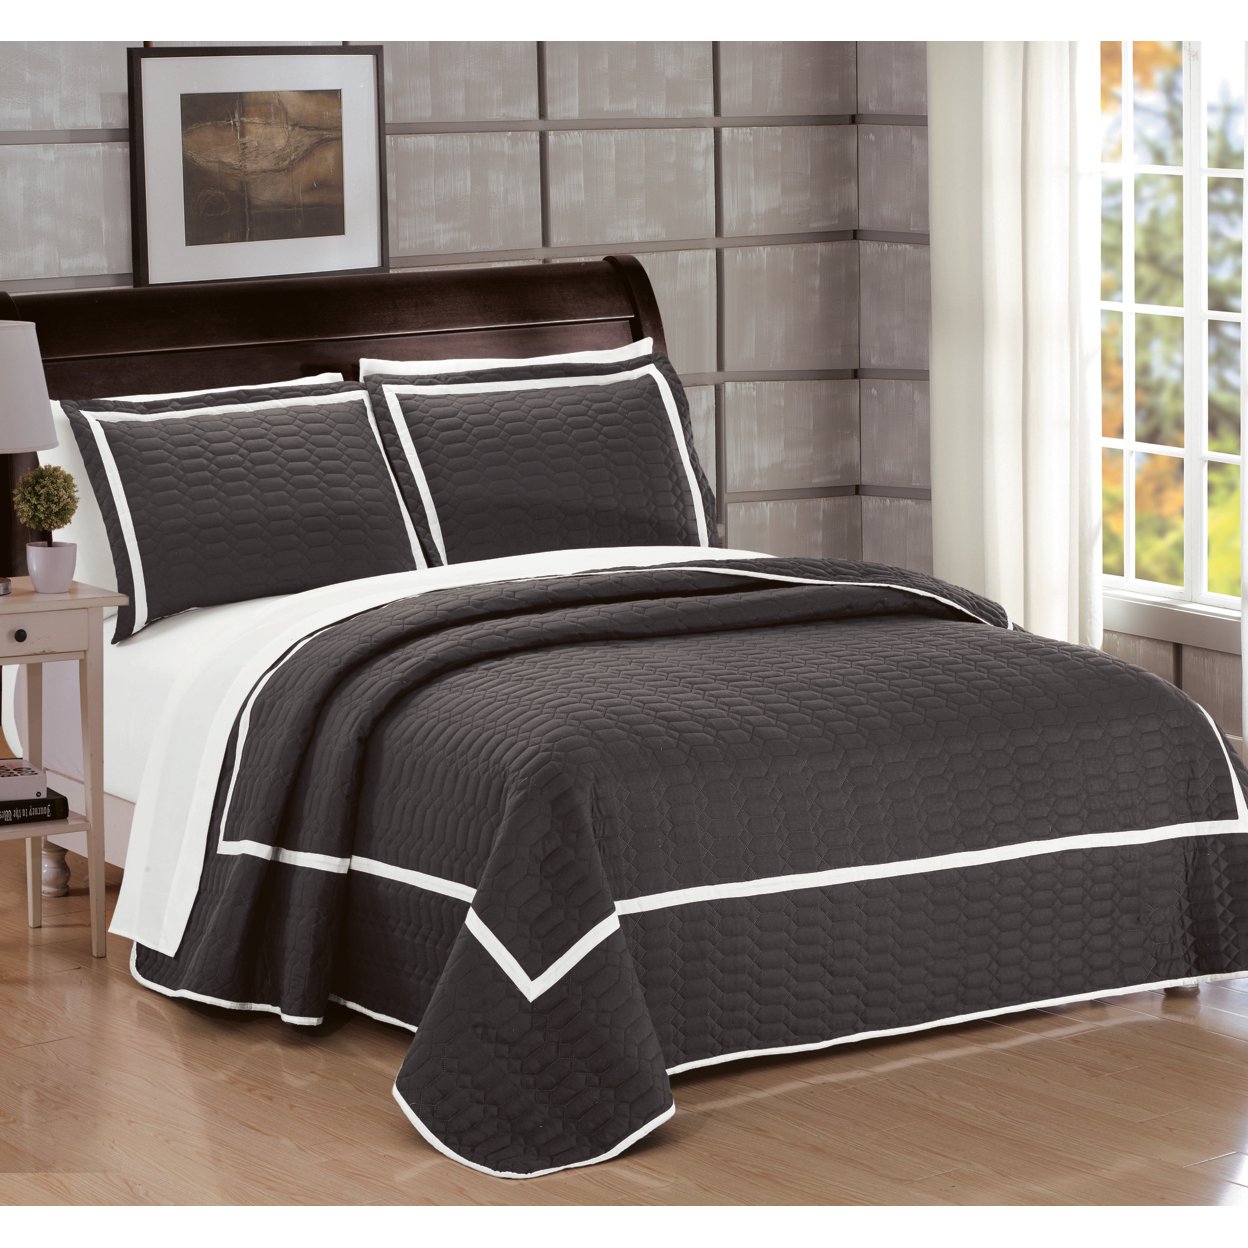 3 Or 2 Piece Halrowe Hotel Collection 2 Tone Banded Quilted Geometrical Embroidered Quilt Set - Grey, Twin